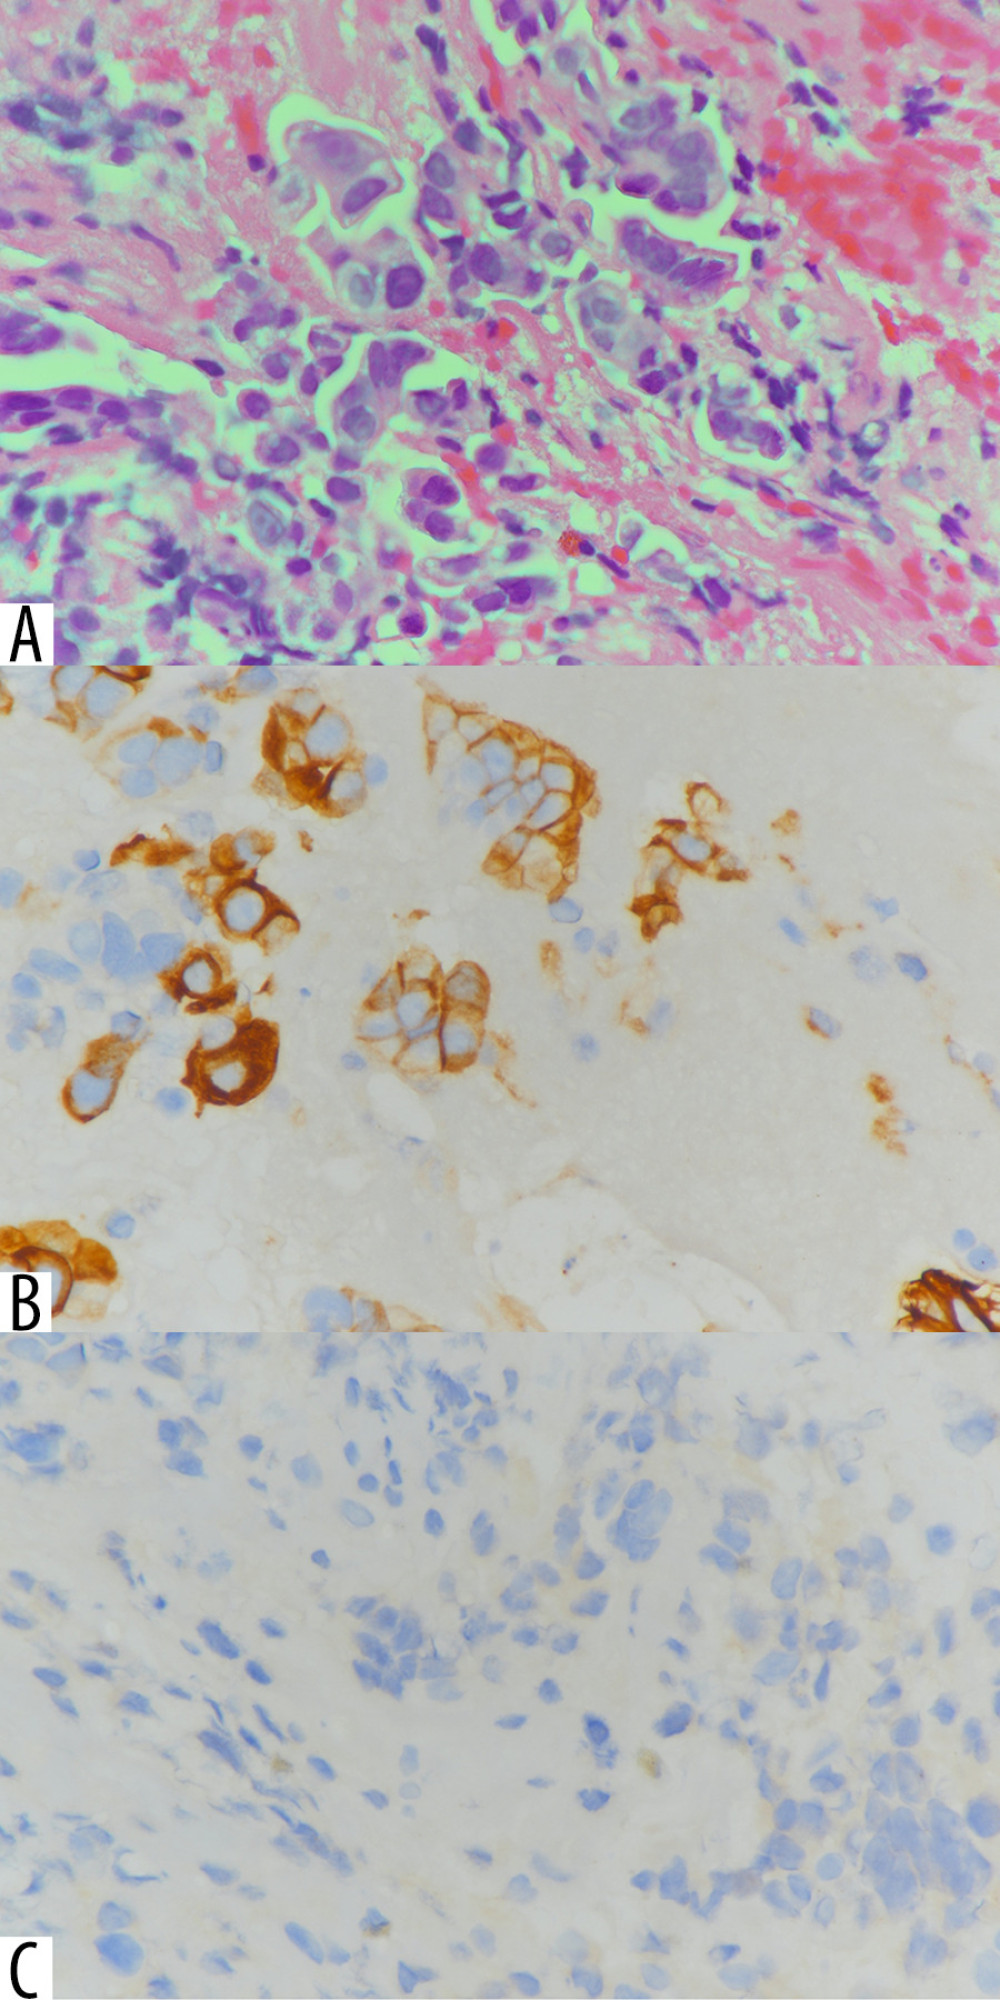 Histopathological and immunohistochemical findings of rectal cancer. (A) Well-to-moderately differentiated adenocarcinoma on the hematoxylin and eosin stain (H and E stain ×20). (B) Negative cytokeratin 7 (CK7) (×10). (C) Positive cytokeratin 20 (CK20) (×10).